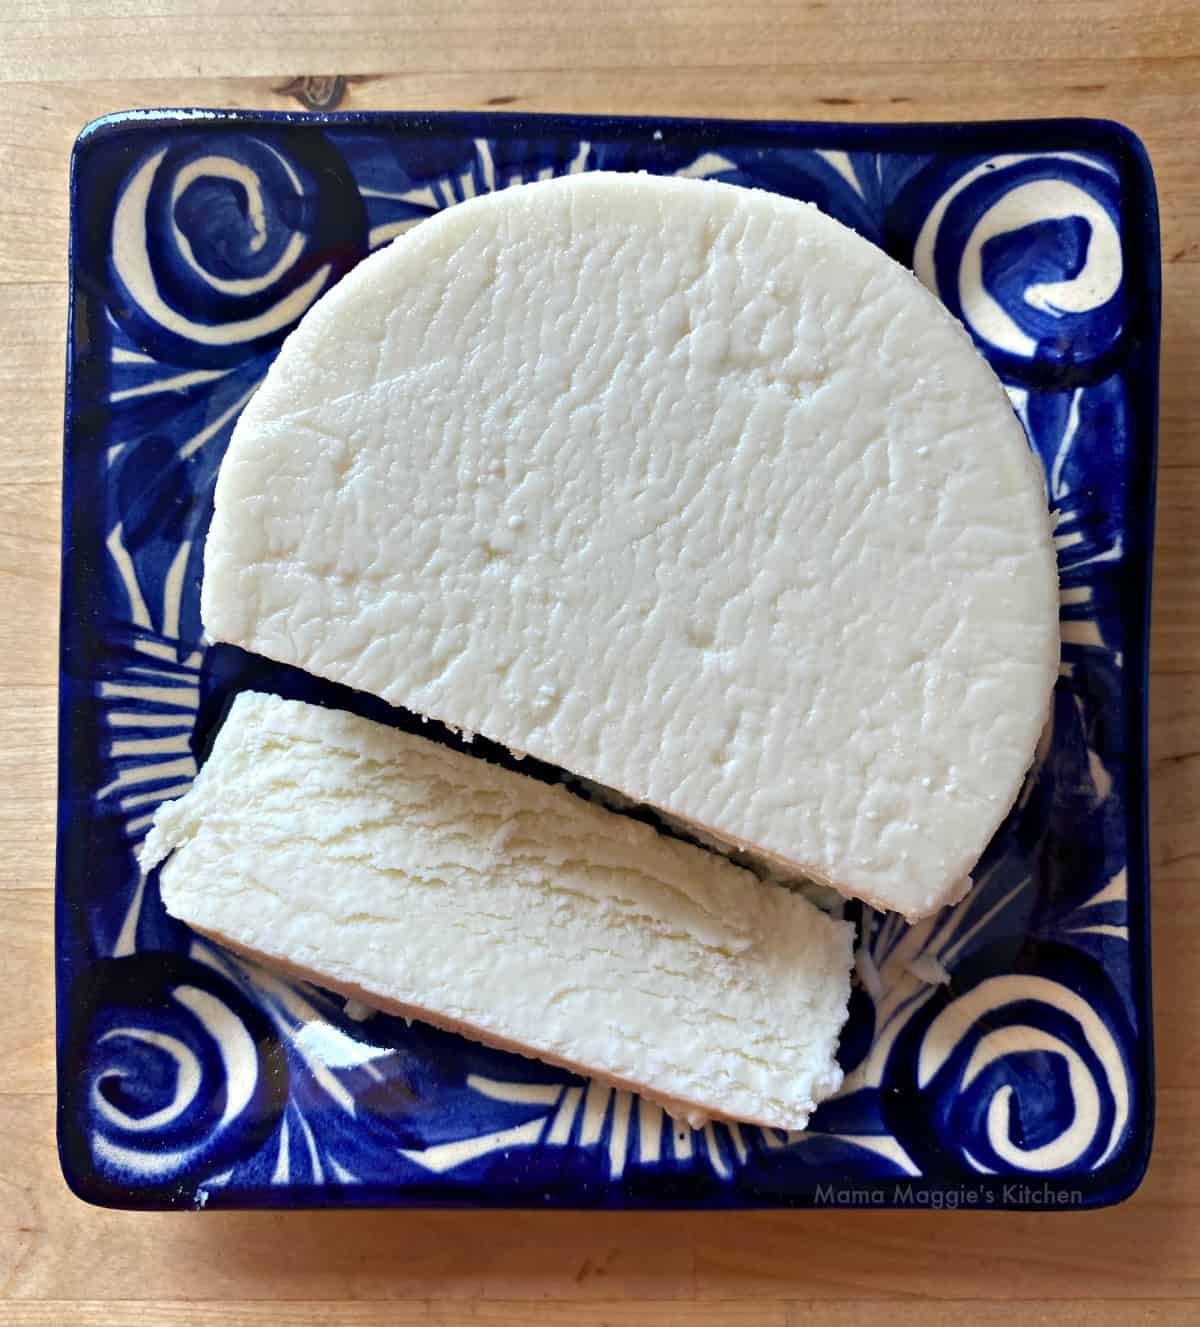 A blue and white plate with queso fresco sliced.